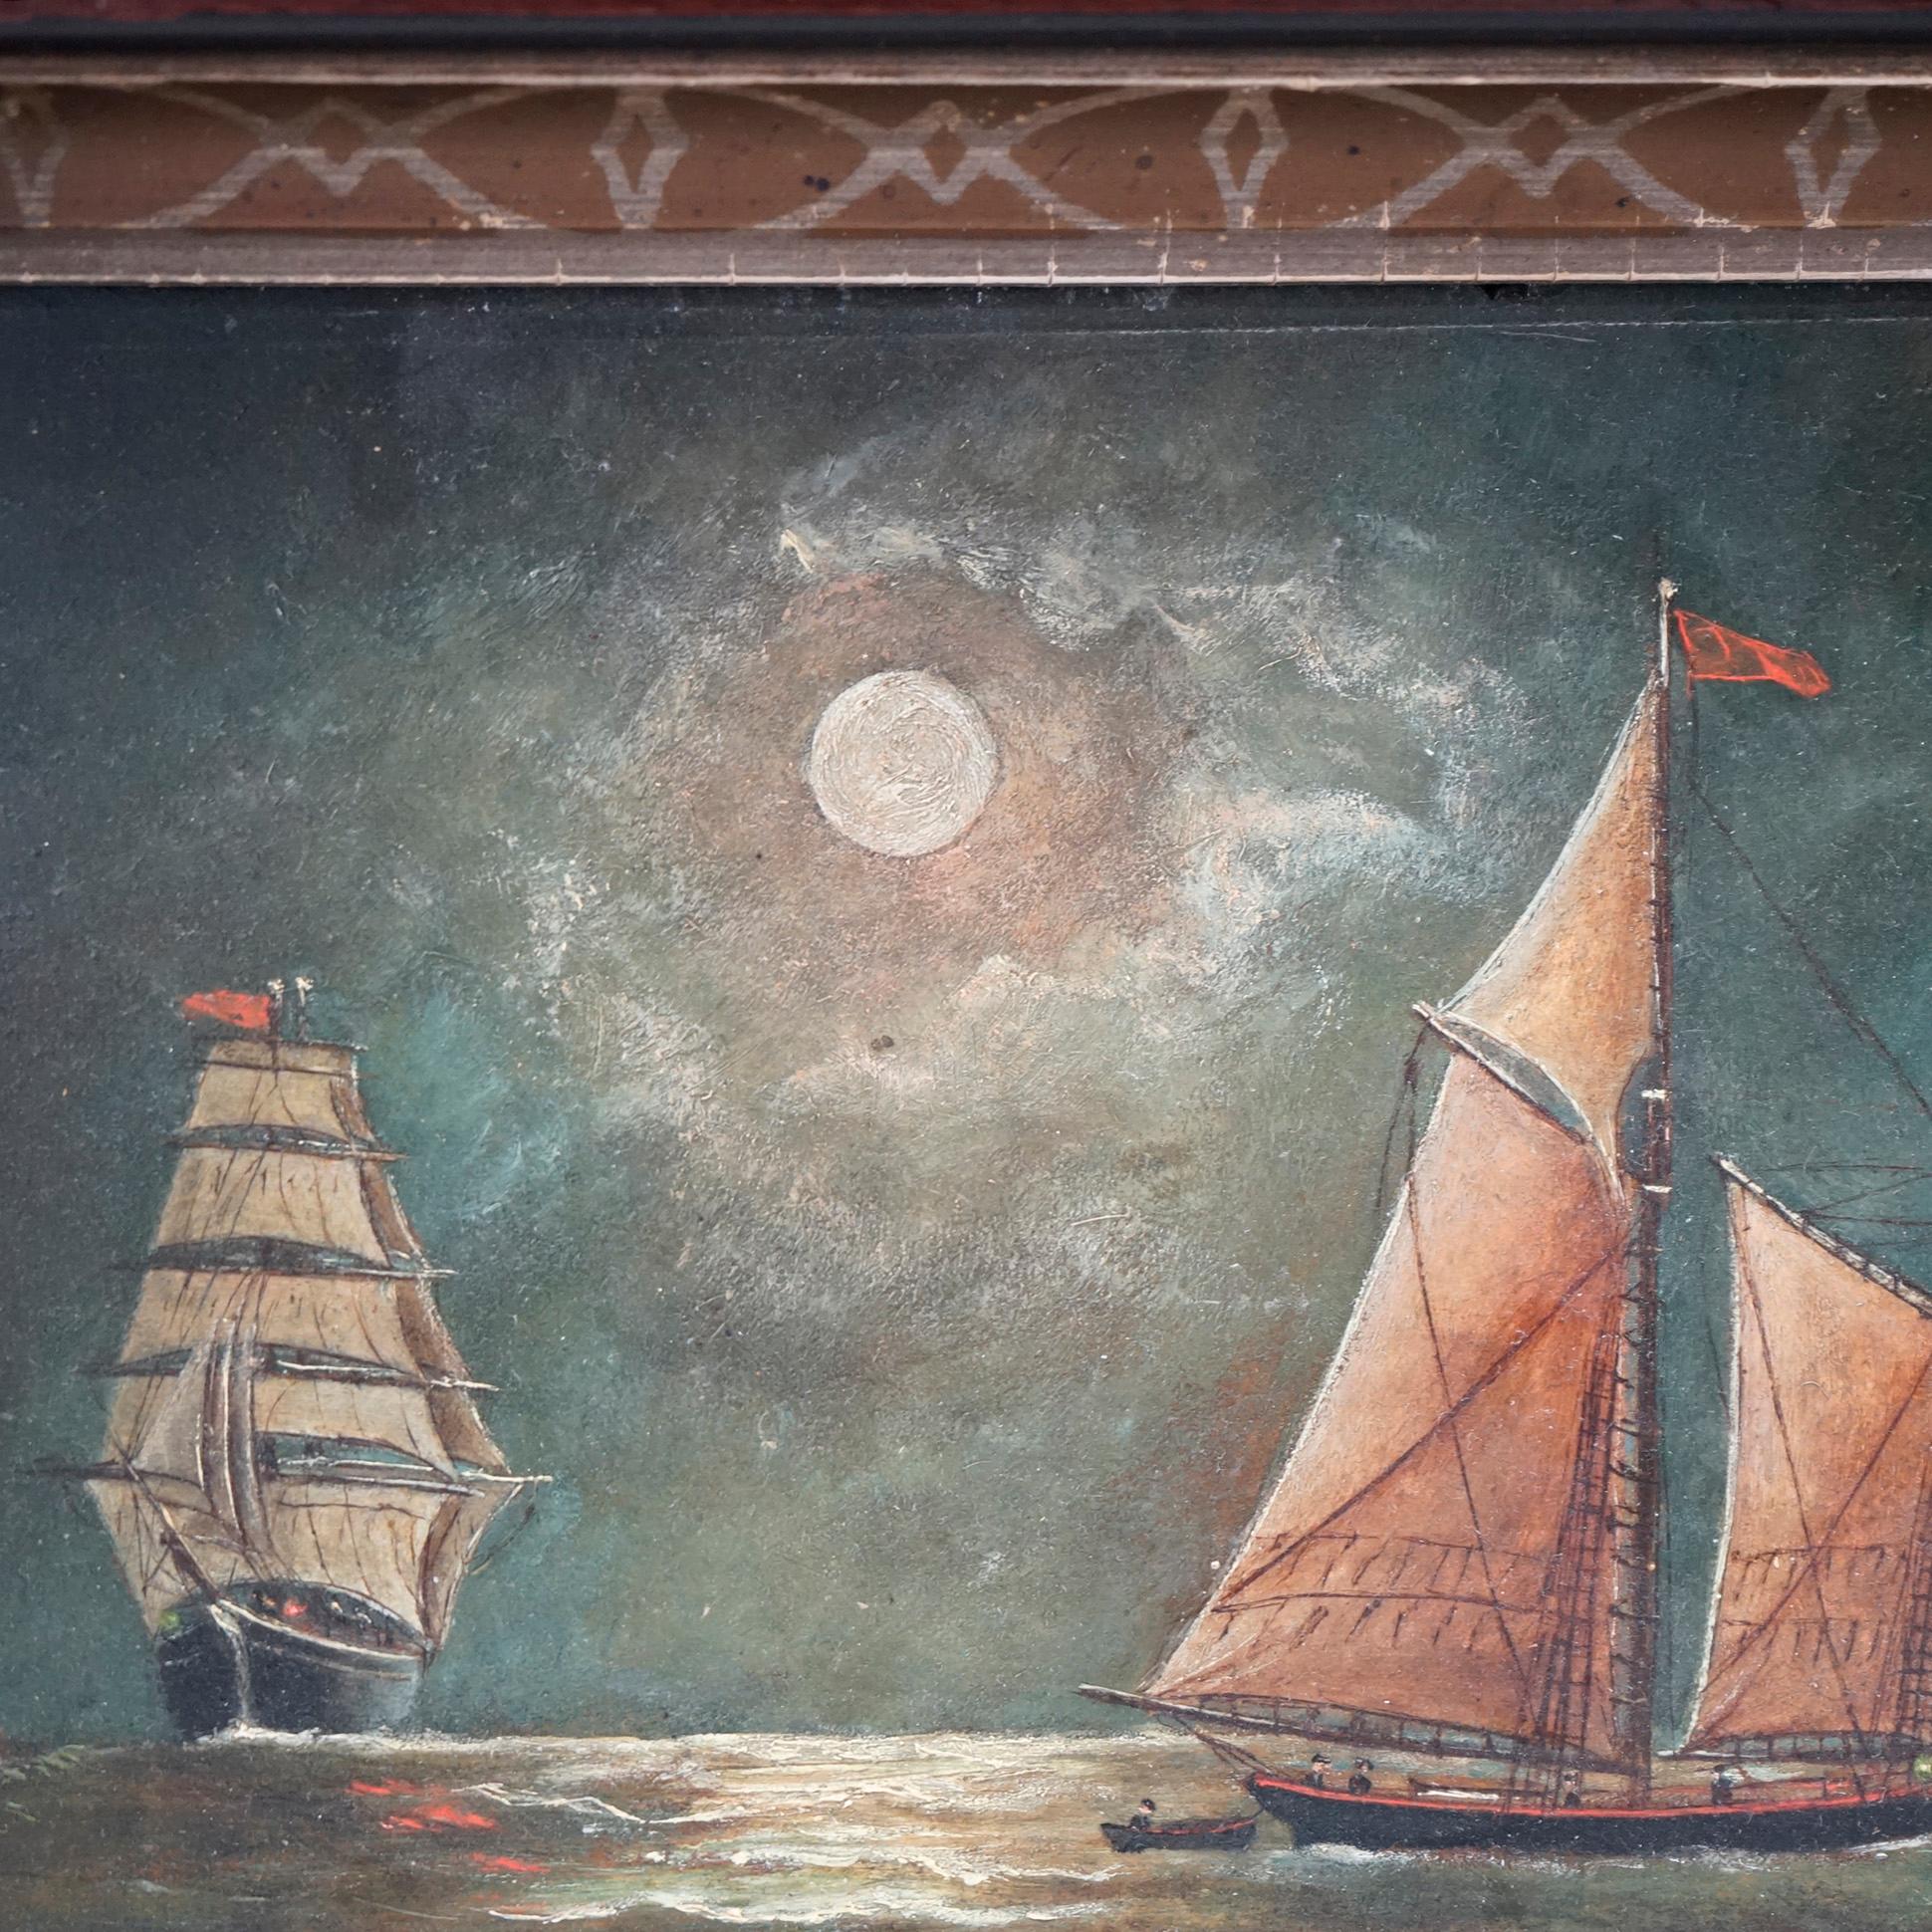 An antique nautical painting by F. Smith offers oil on board evening seascape with tall mast ships under a moon lit sky, artist signed lower right, seated in deep walnut frame, c1890

Measures - overall 10.5''H x 12.5''W x 2.25''D; sight 8'' x